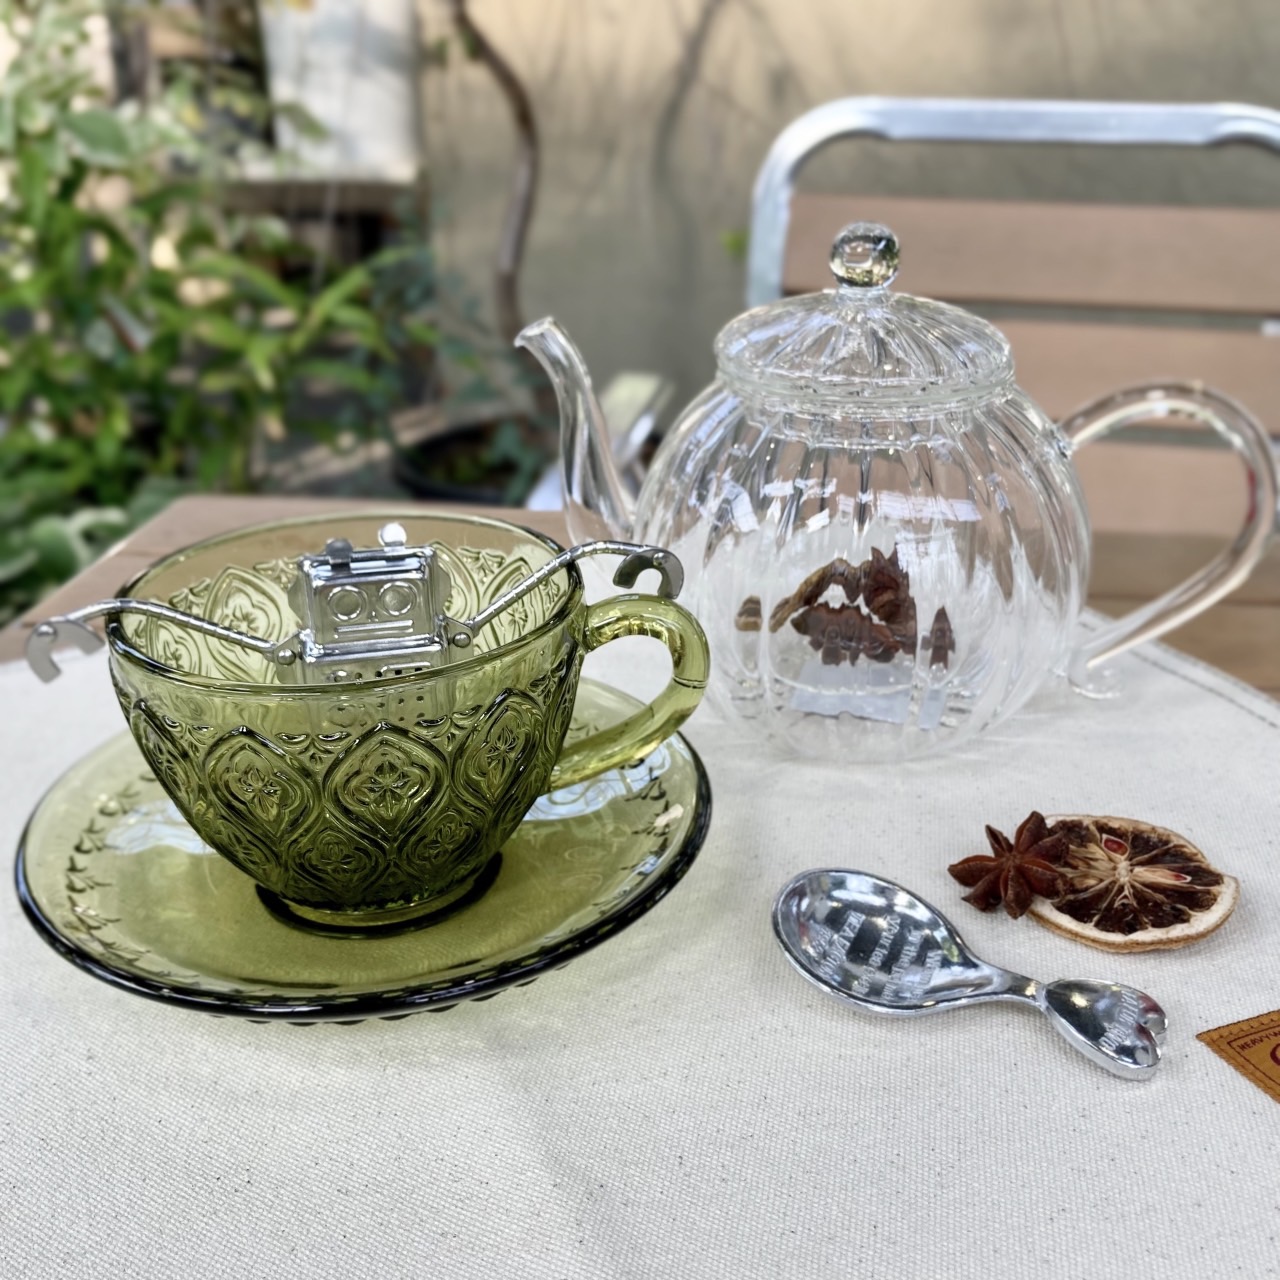 GLASS CUP & SAUCER ''FIORE'' GREEN